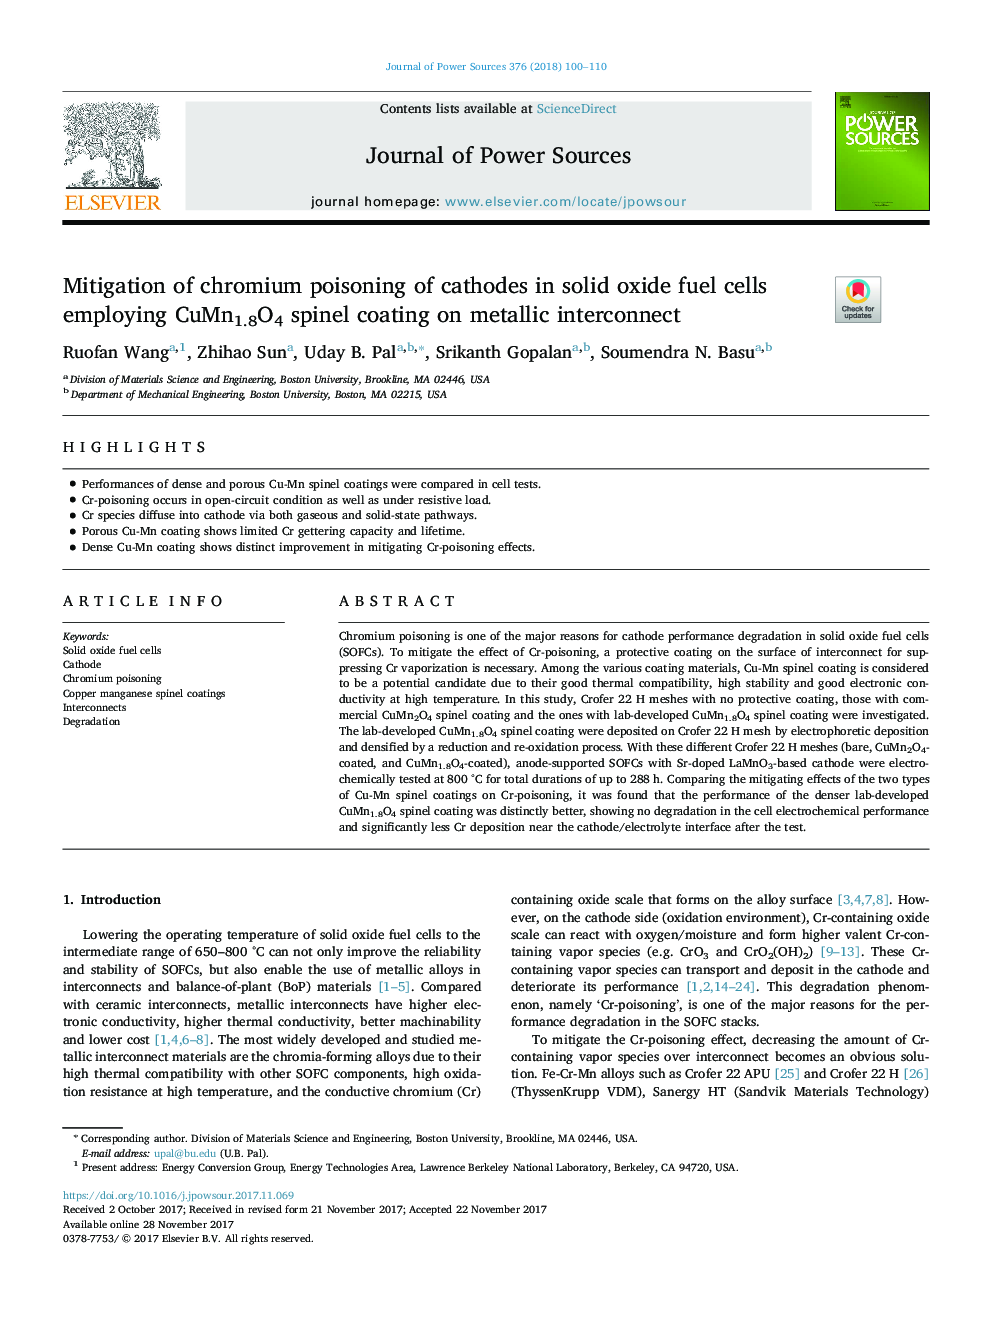 Mitigation of chromium poisoning of cathodes in solid oxide fuel cells employing CuMn1.8O4 spinel coating on metallic interconnect